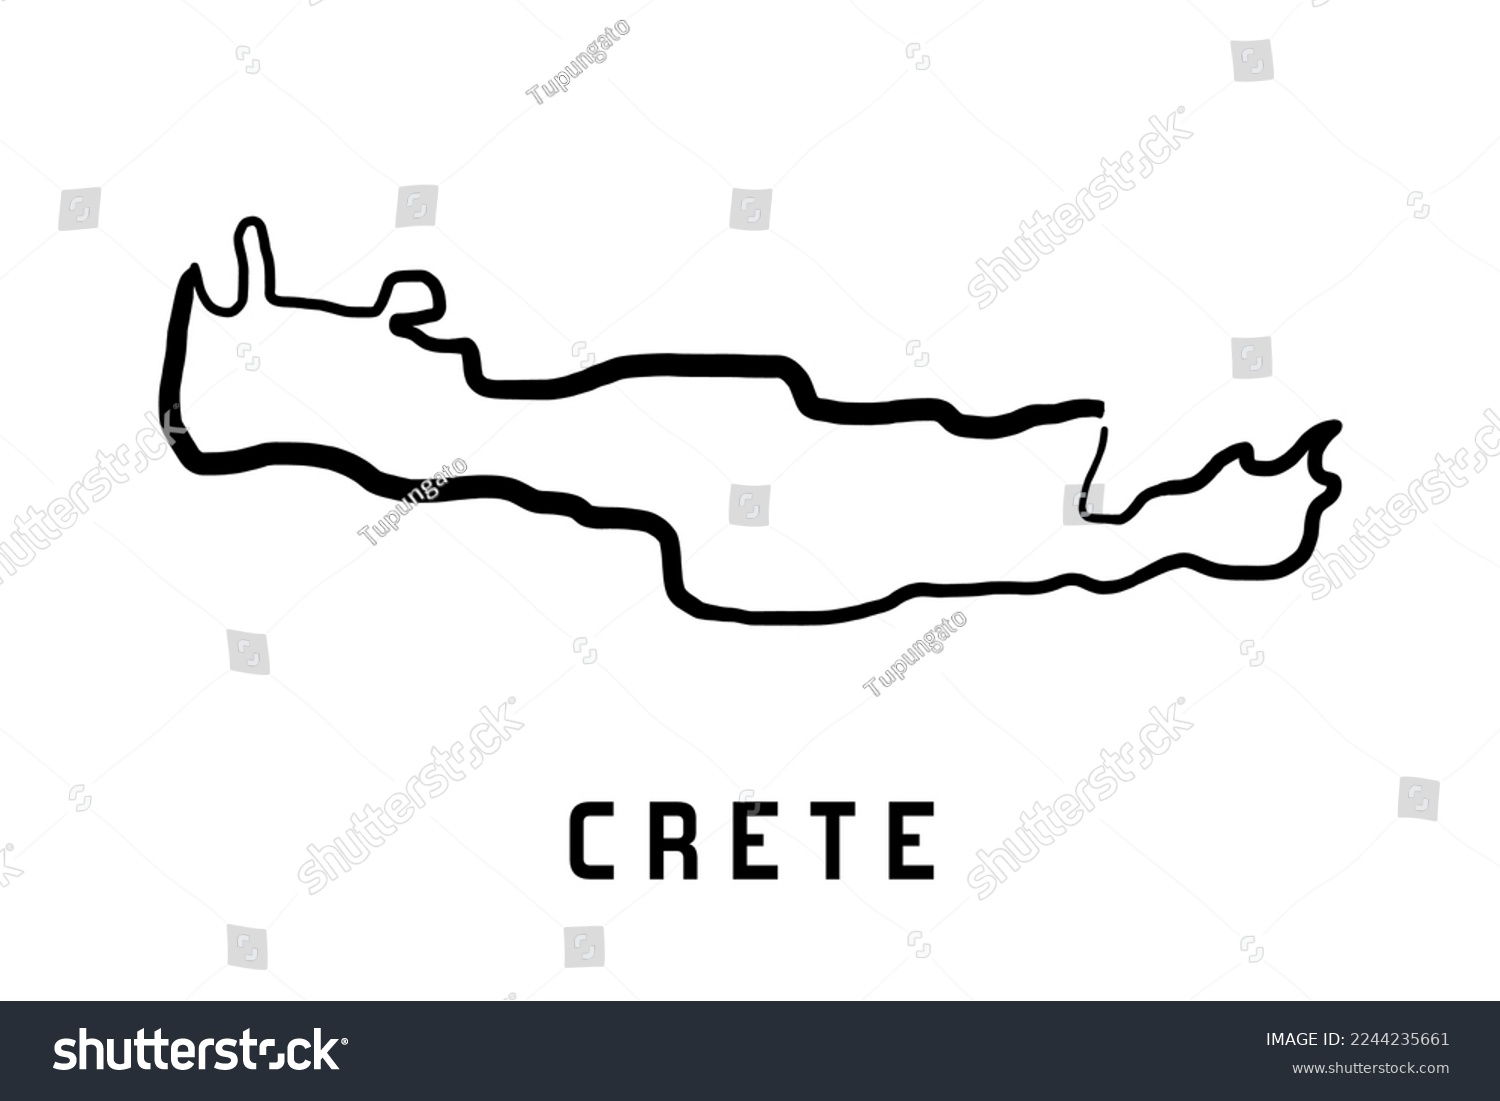 SVG of Crete island map in Greece. Simple outline. Vector hand drawn simplified style map. svg